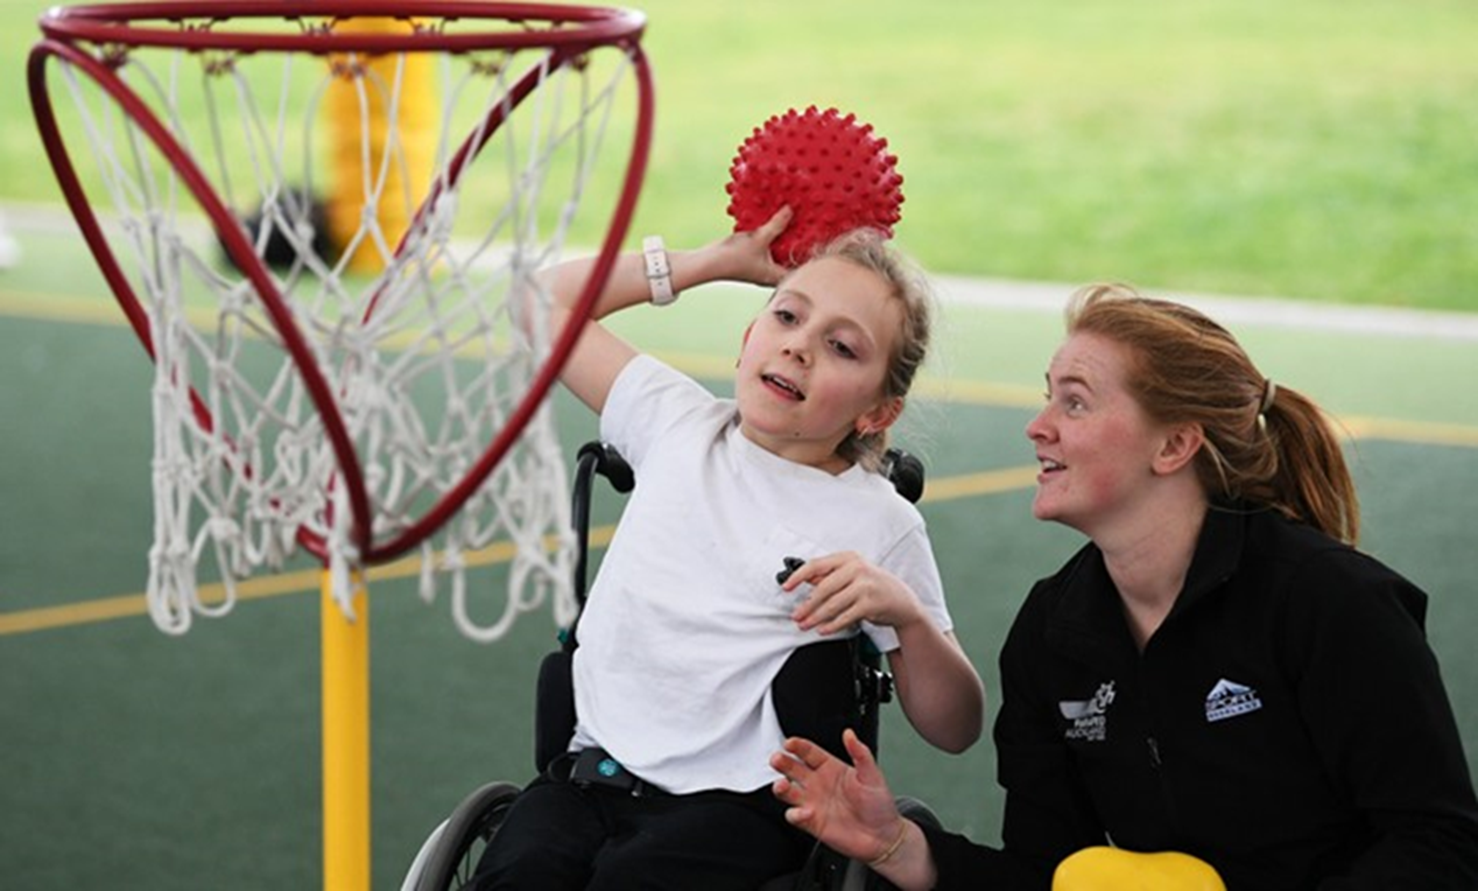 A girl in a wheelchair throwing a red ball in a goal